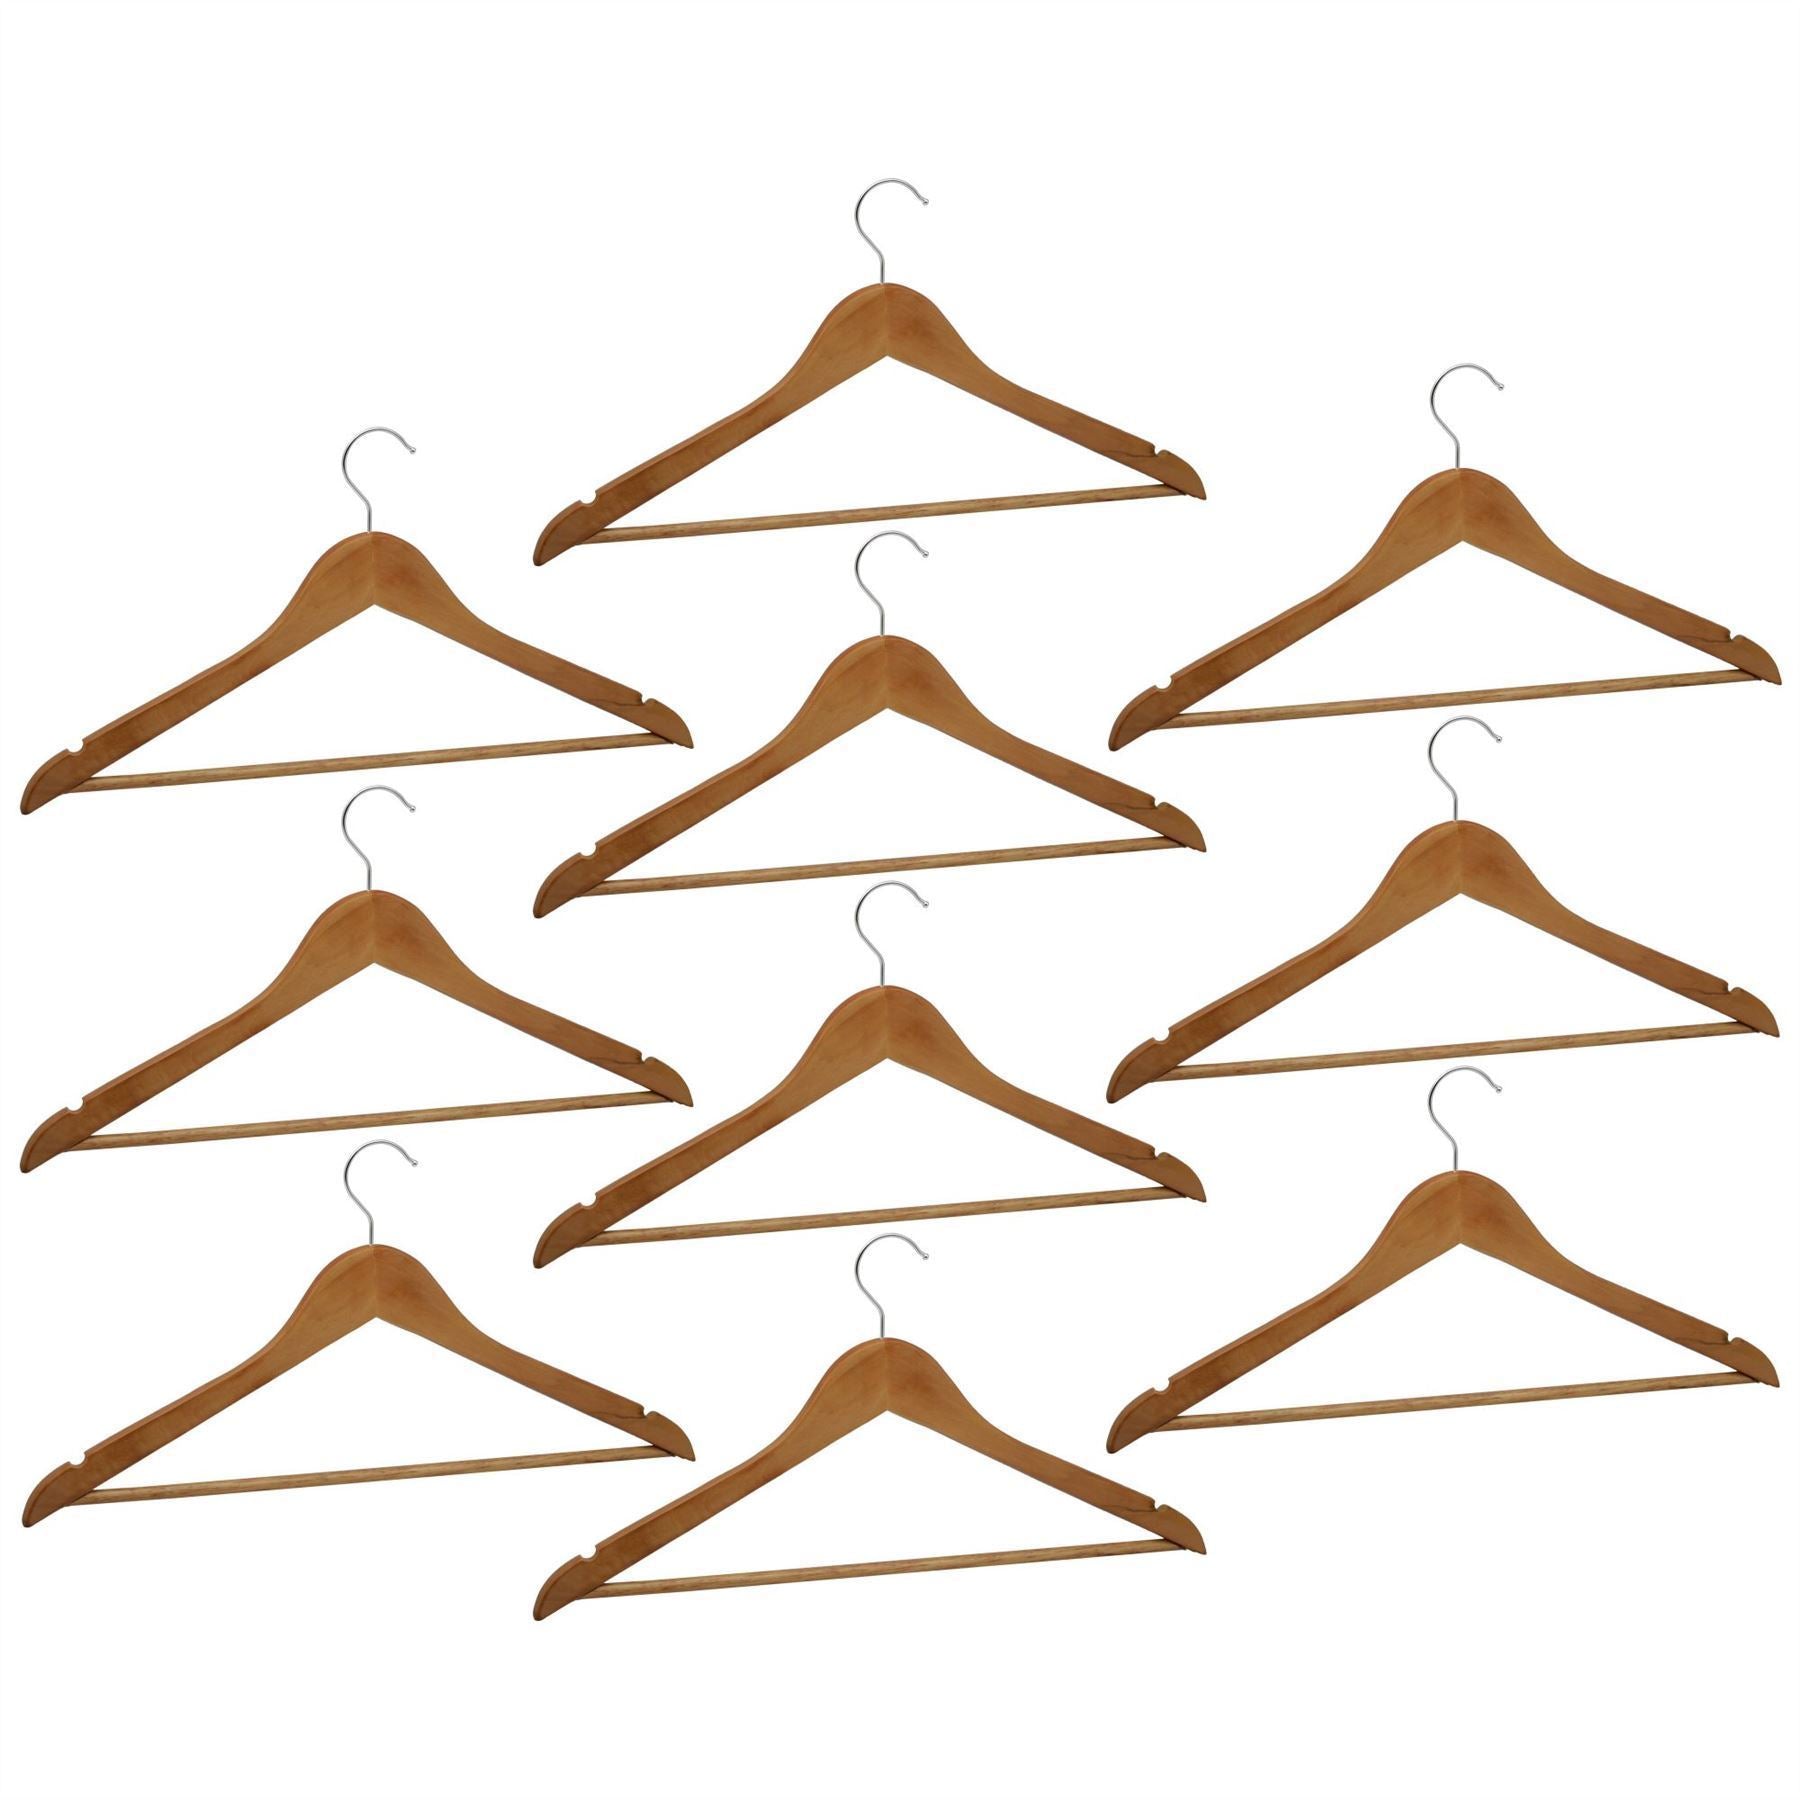 Harbour Housewares Wooden Clothes Hanger - Natural Wood - Pack of 10